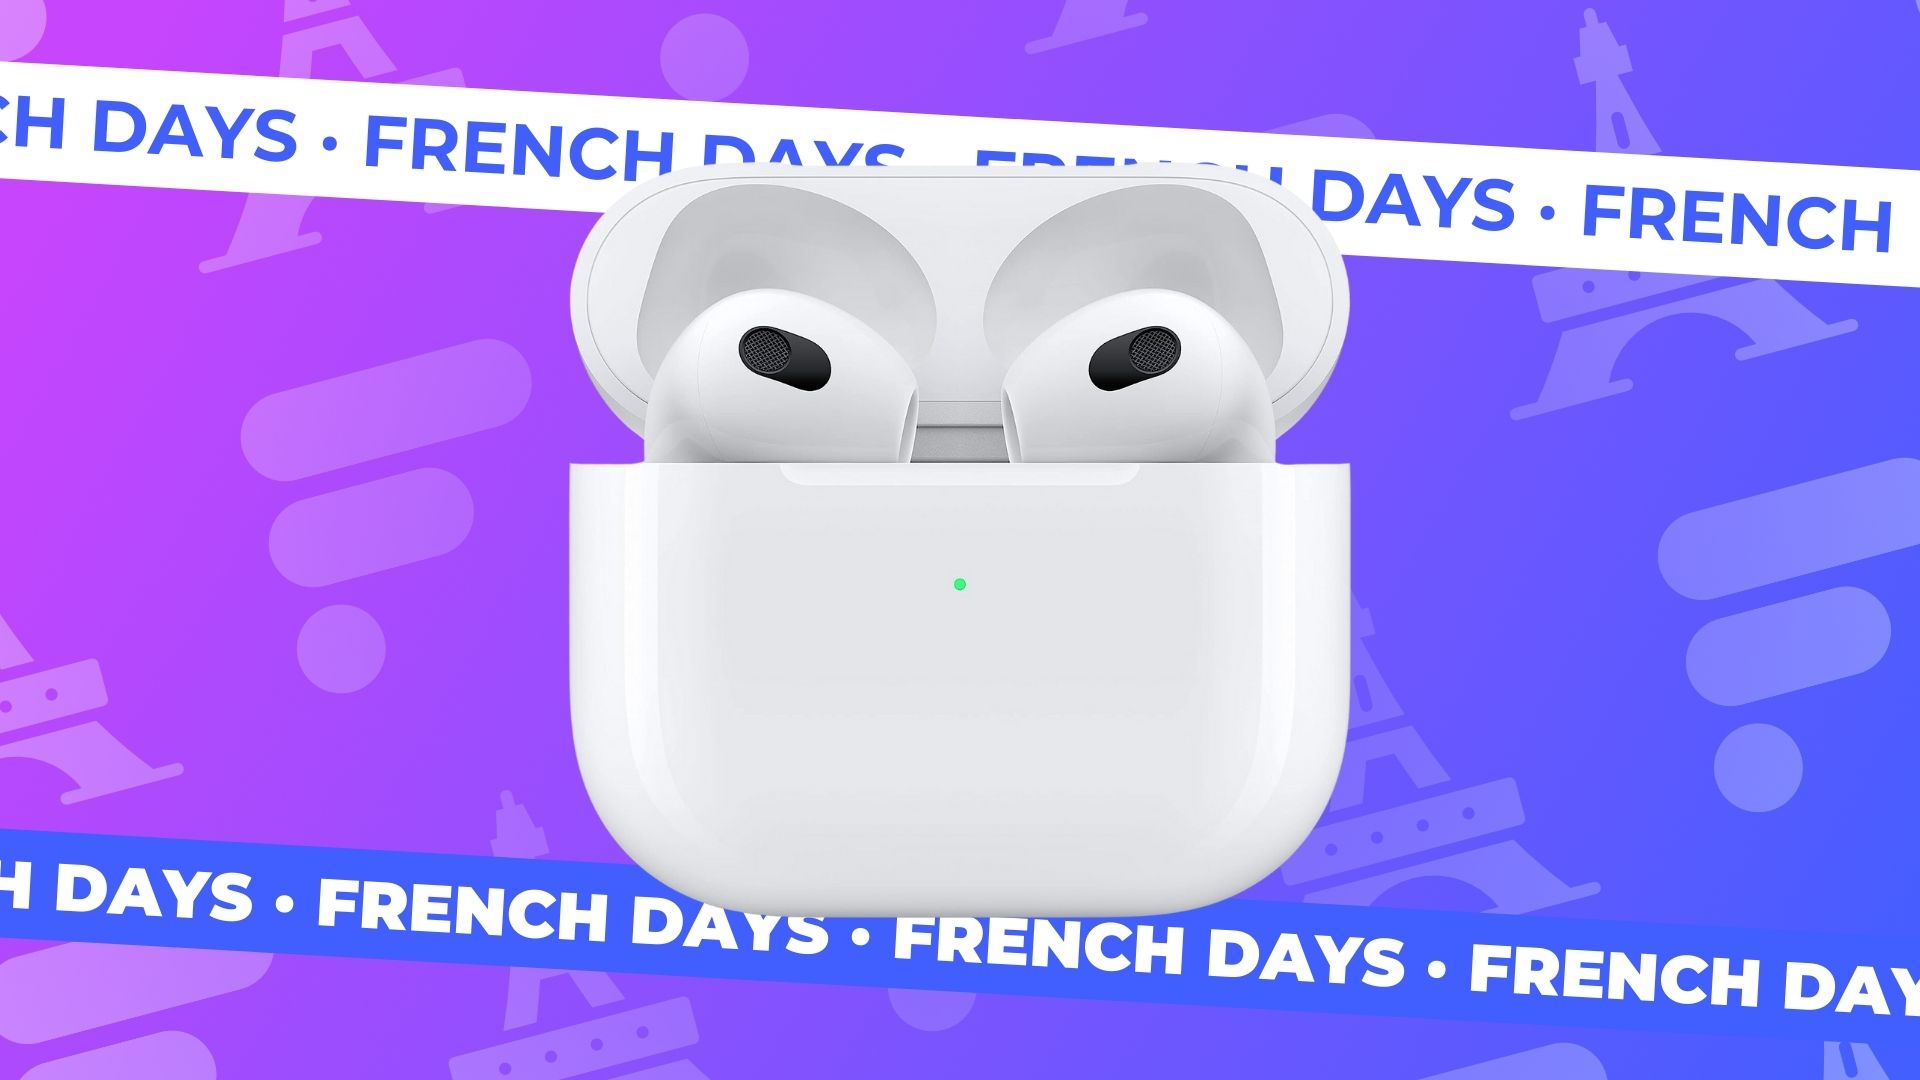 Apple AirPods 3 dropped to a price never before seen on Amazon during the height of the French days